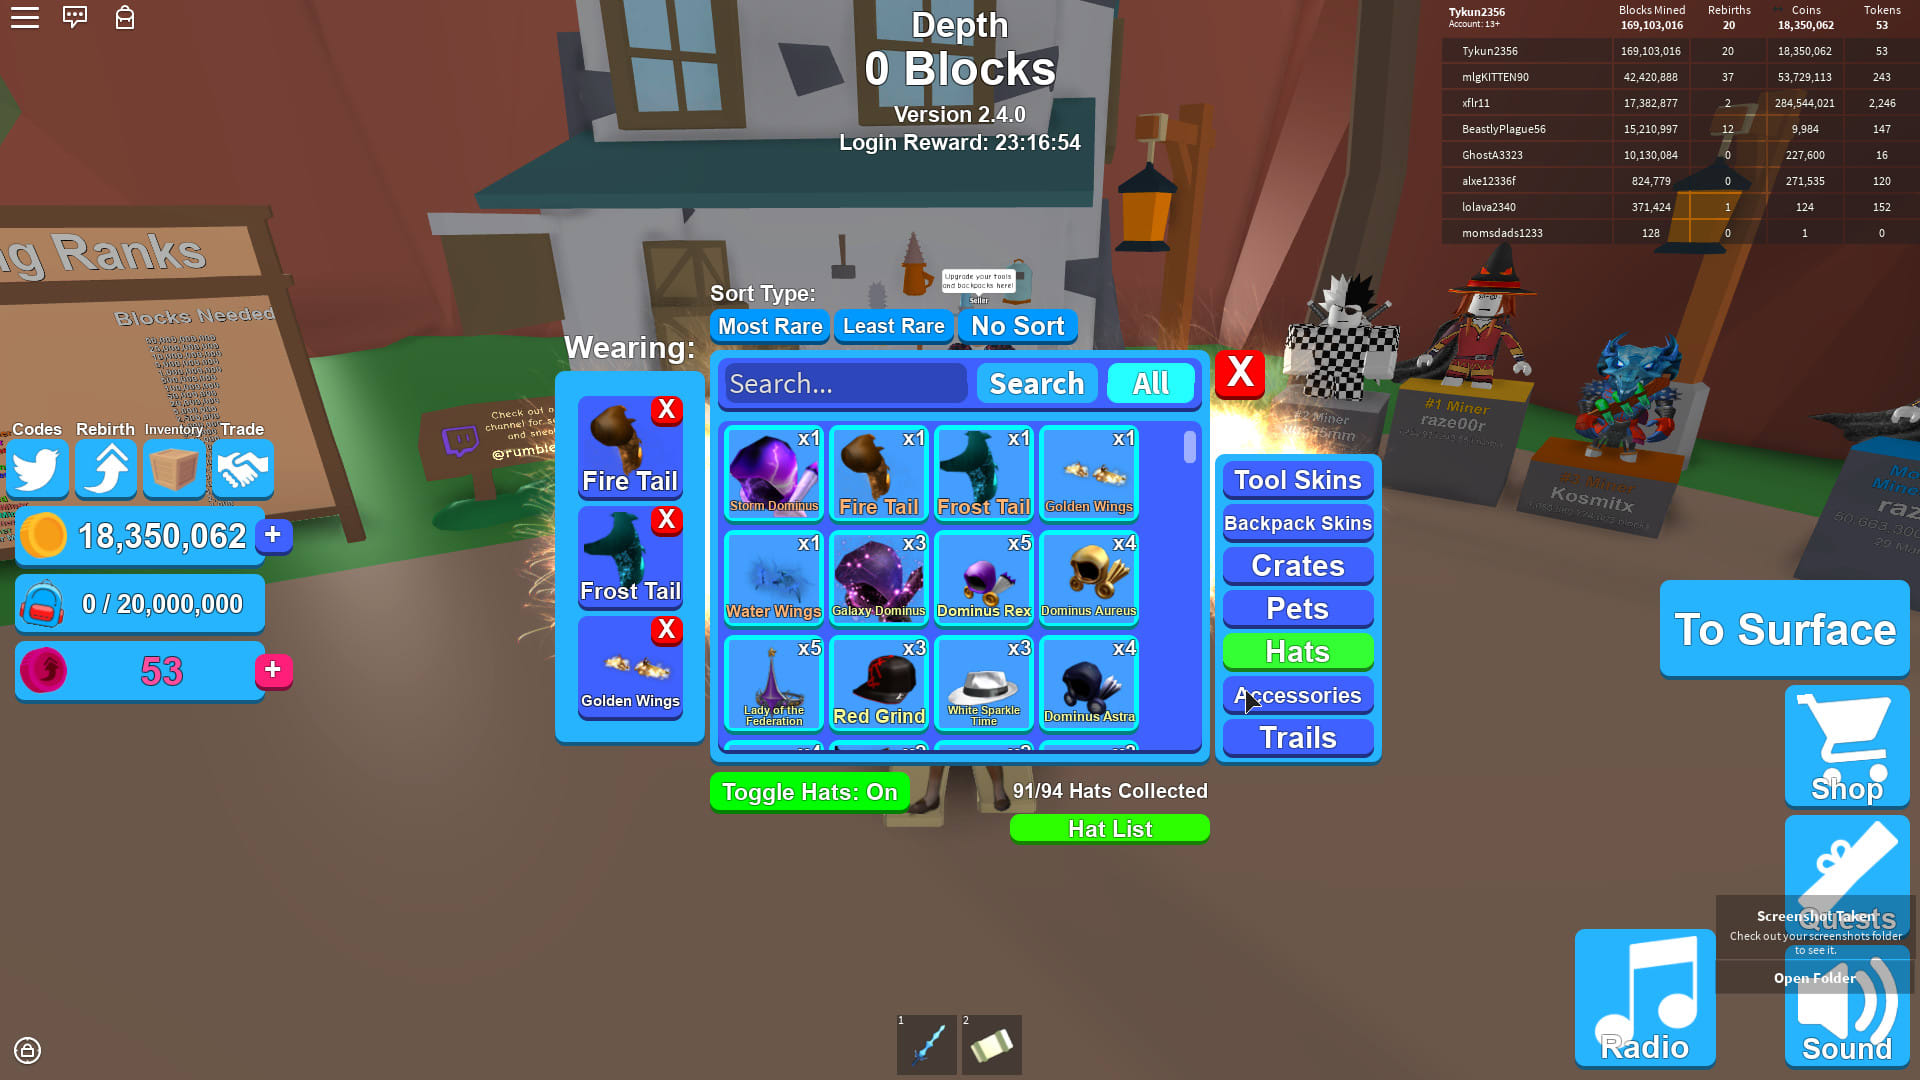 Roblox How To Sell Items In Game Get 25 Robux - rich people on roblox tracker player